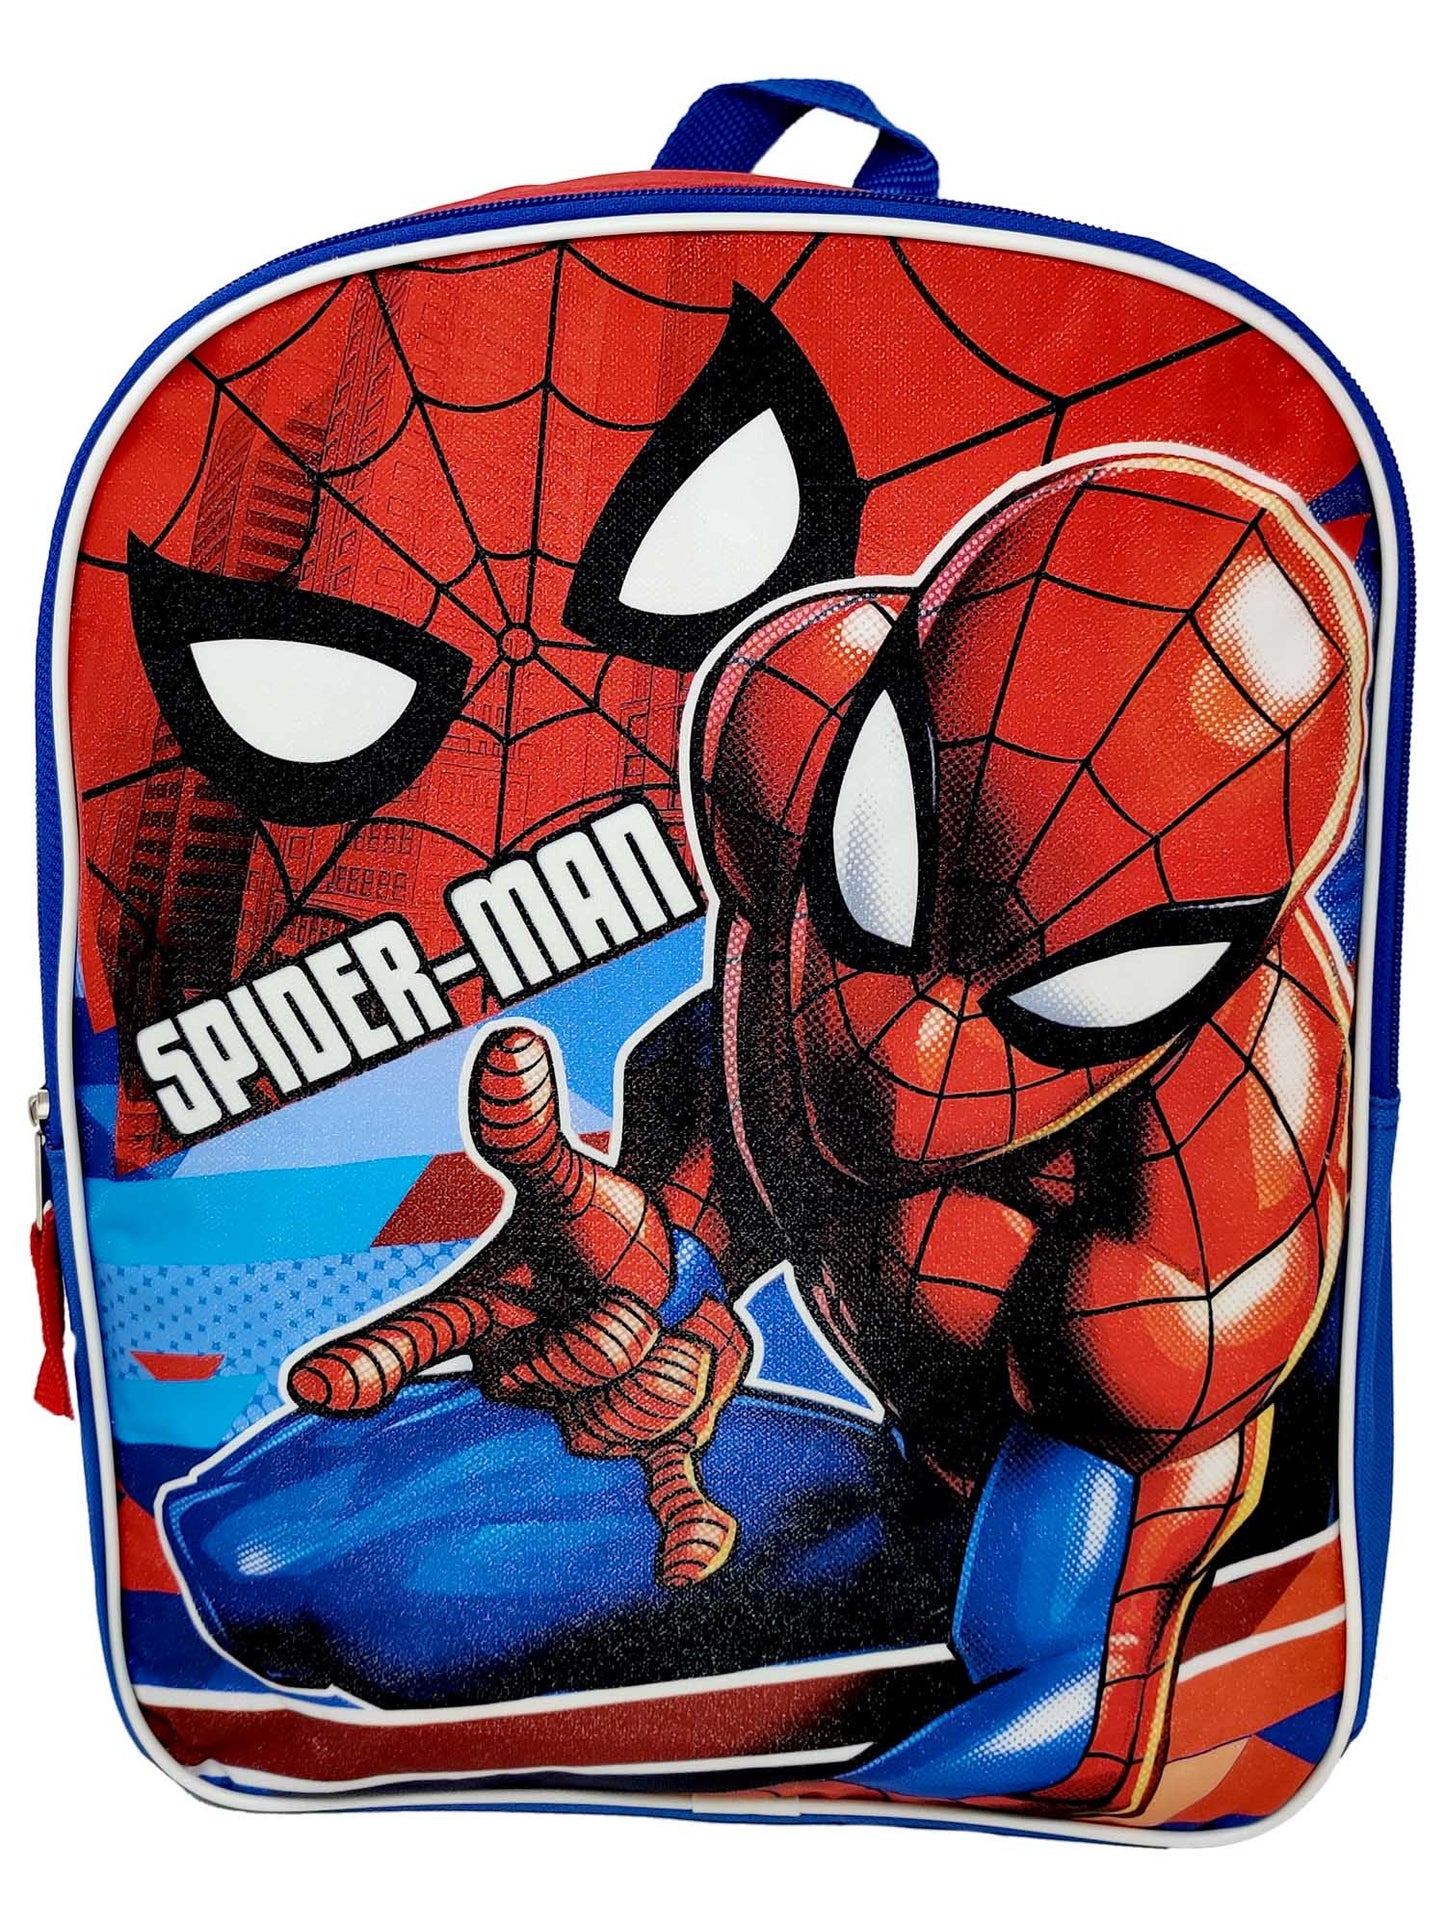 Spider-Man Superhero 15" Backpack Flat Front with 3-Ring Holder Pencil Pouch